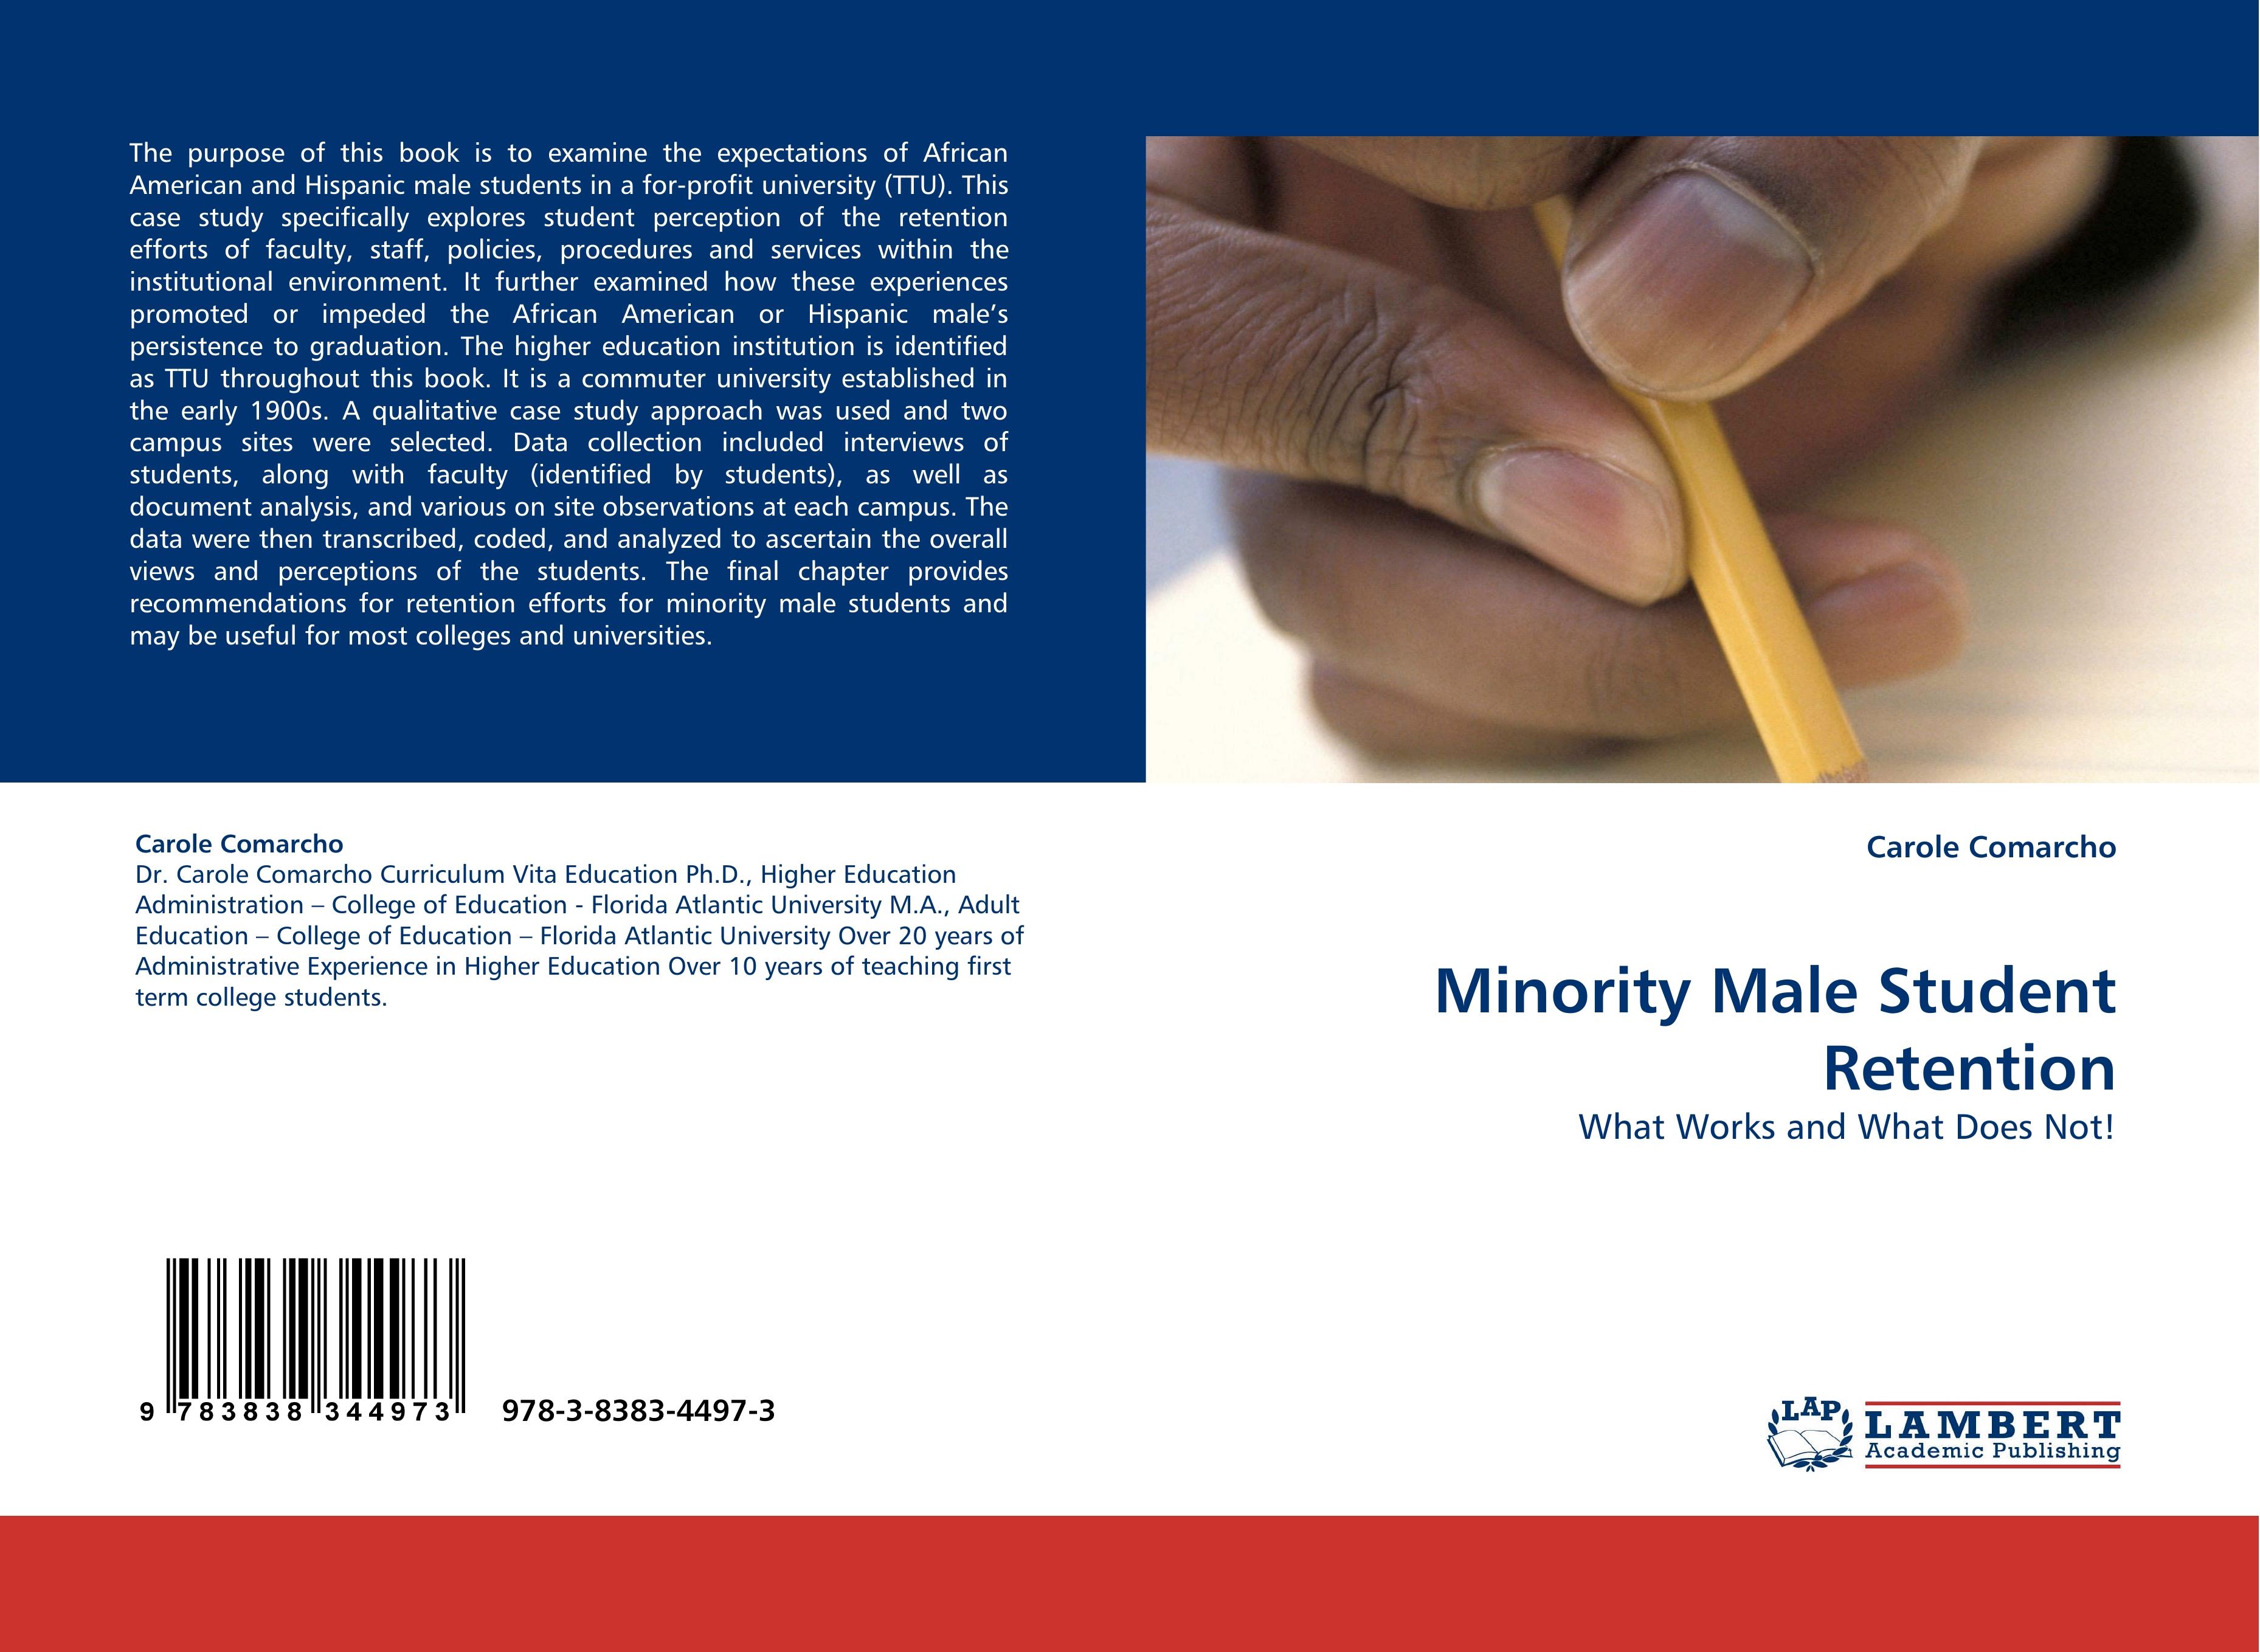 Minority Male Student Retention / What Works and What Does Not! / Carole Comarcho / Taschenbuch / Paperback / 76 S. / Englisch / 2010 / LAP LAMBERT Academic Publishing / EAN 9783838344973 - Comarcho, Carole